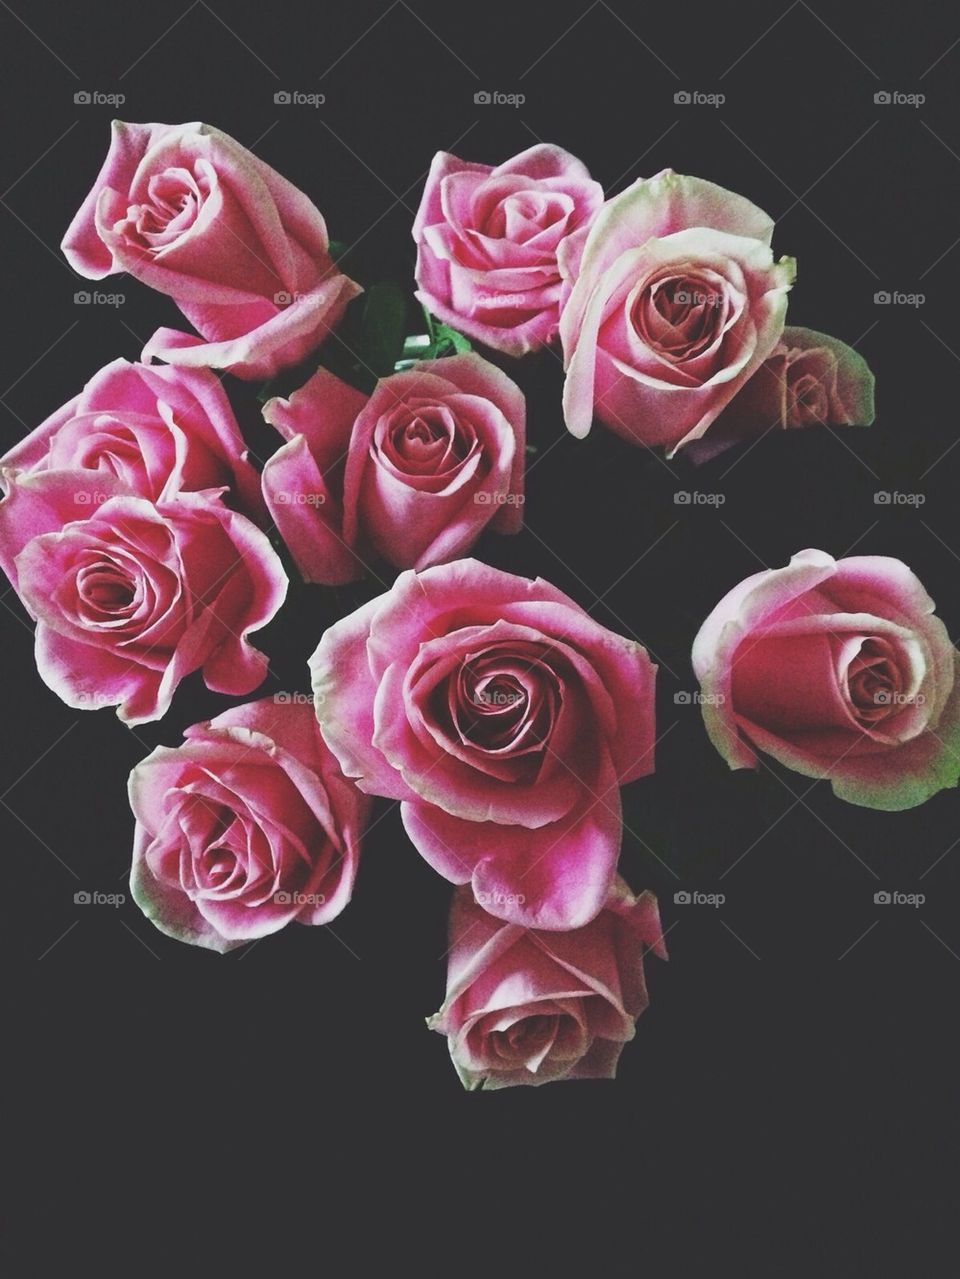 Roses are Pink